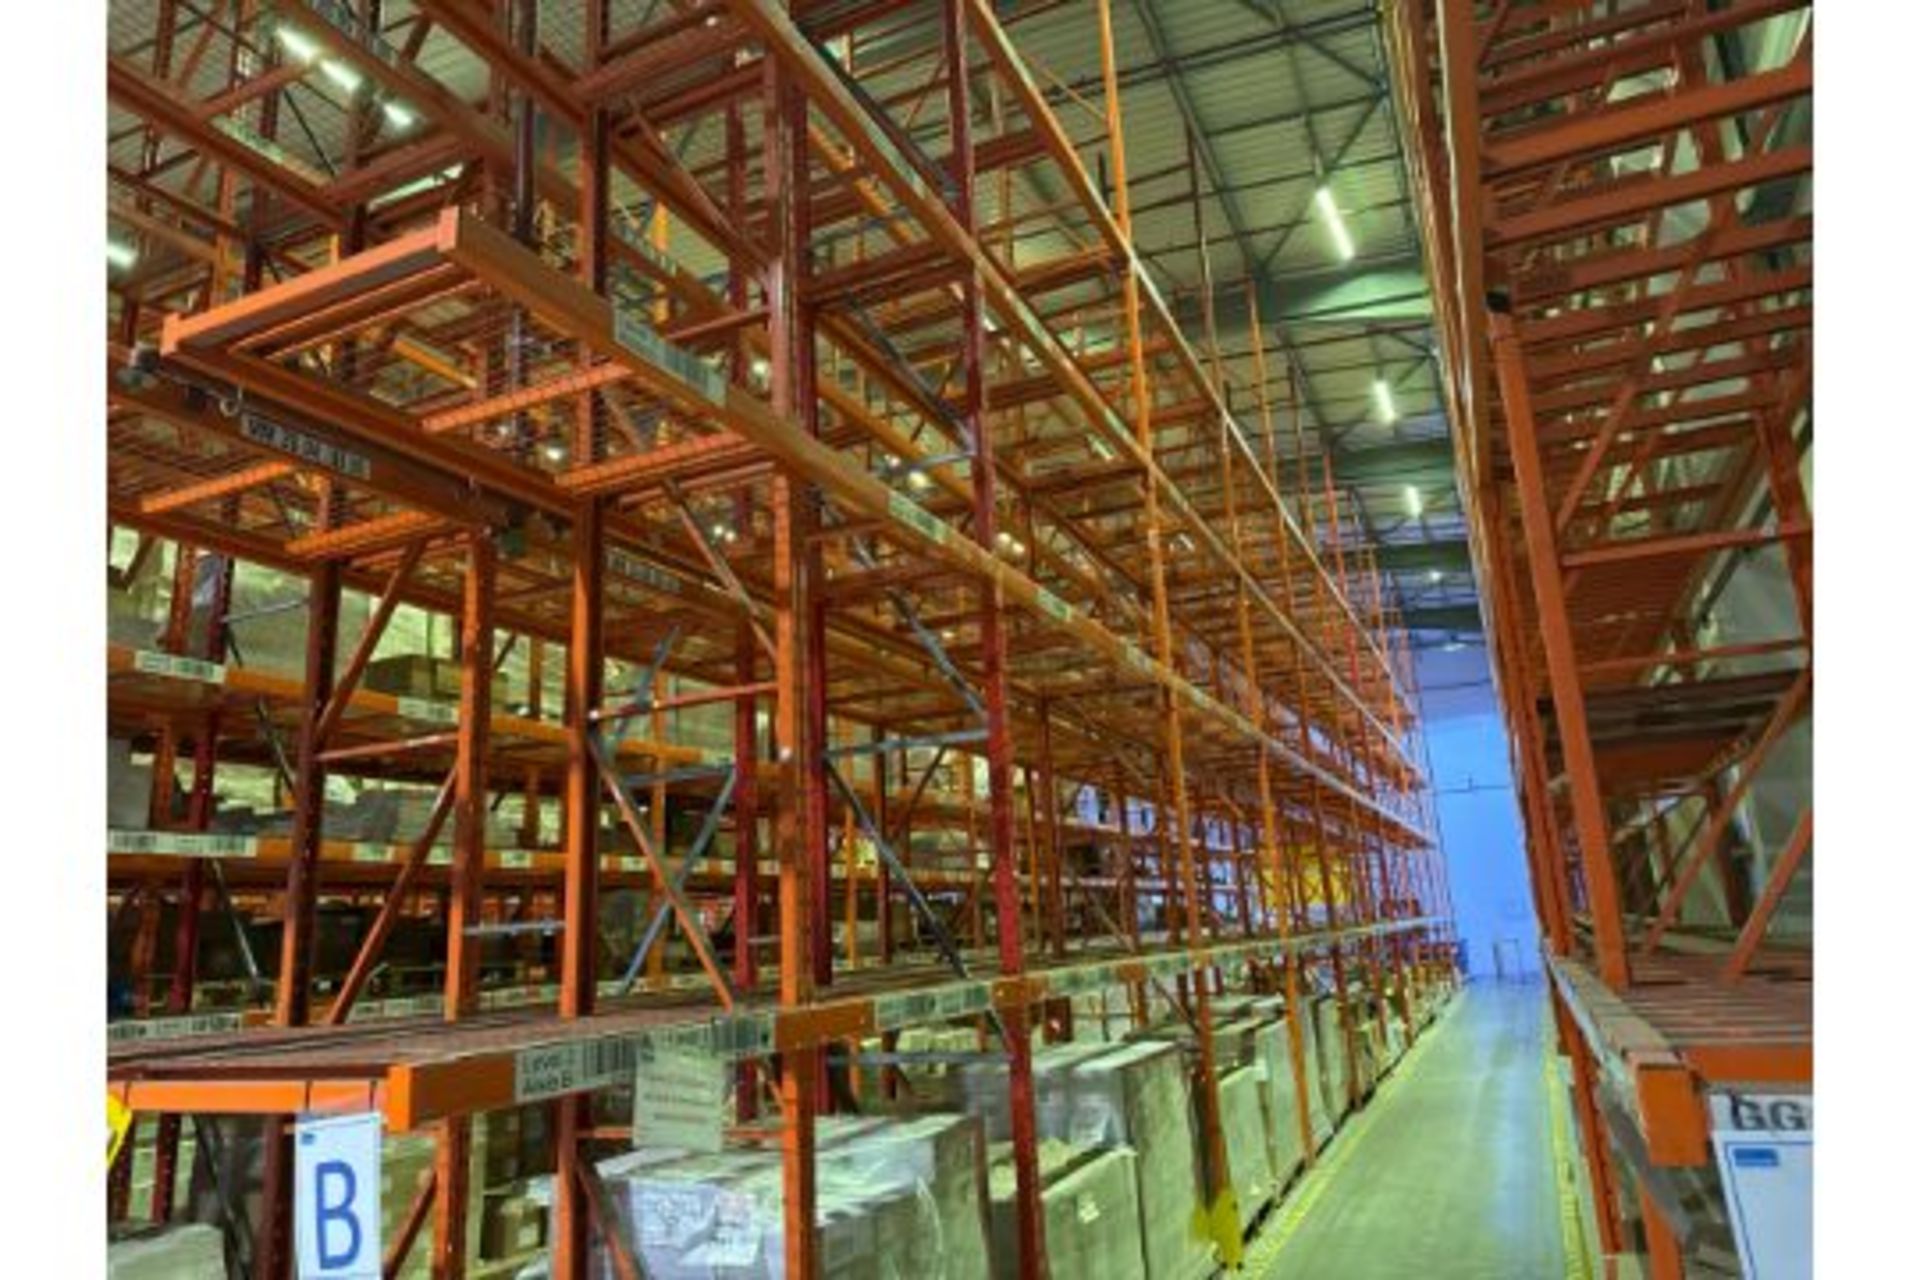 22 Bays Of Boltless Racking - Image 4 of 9